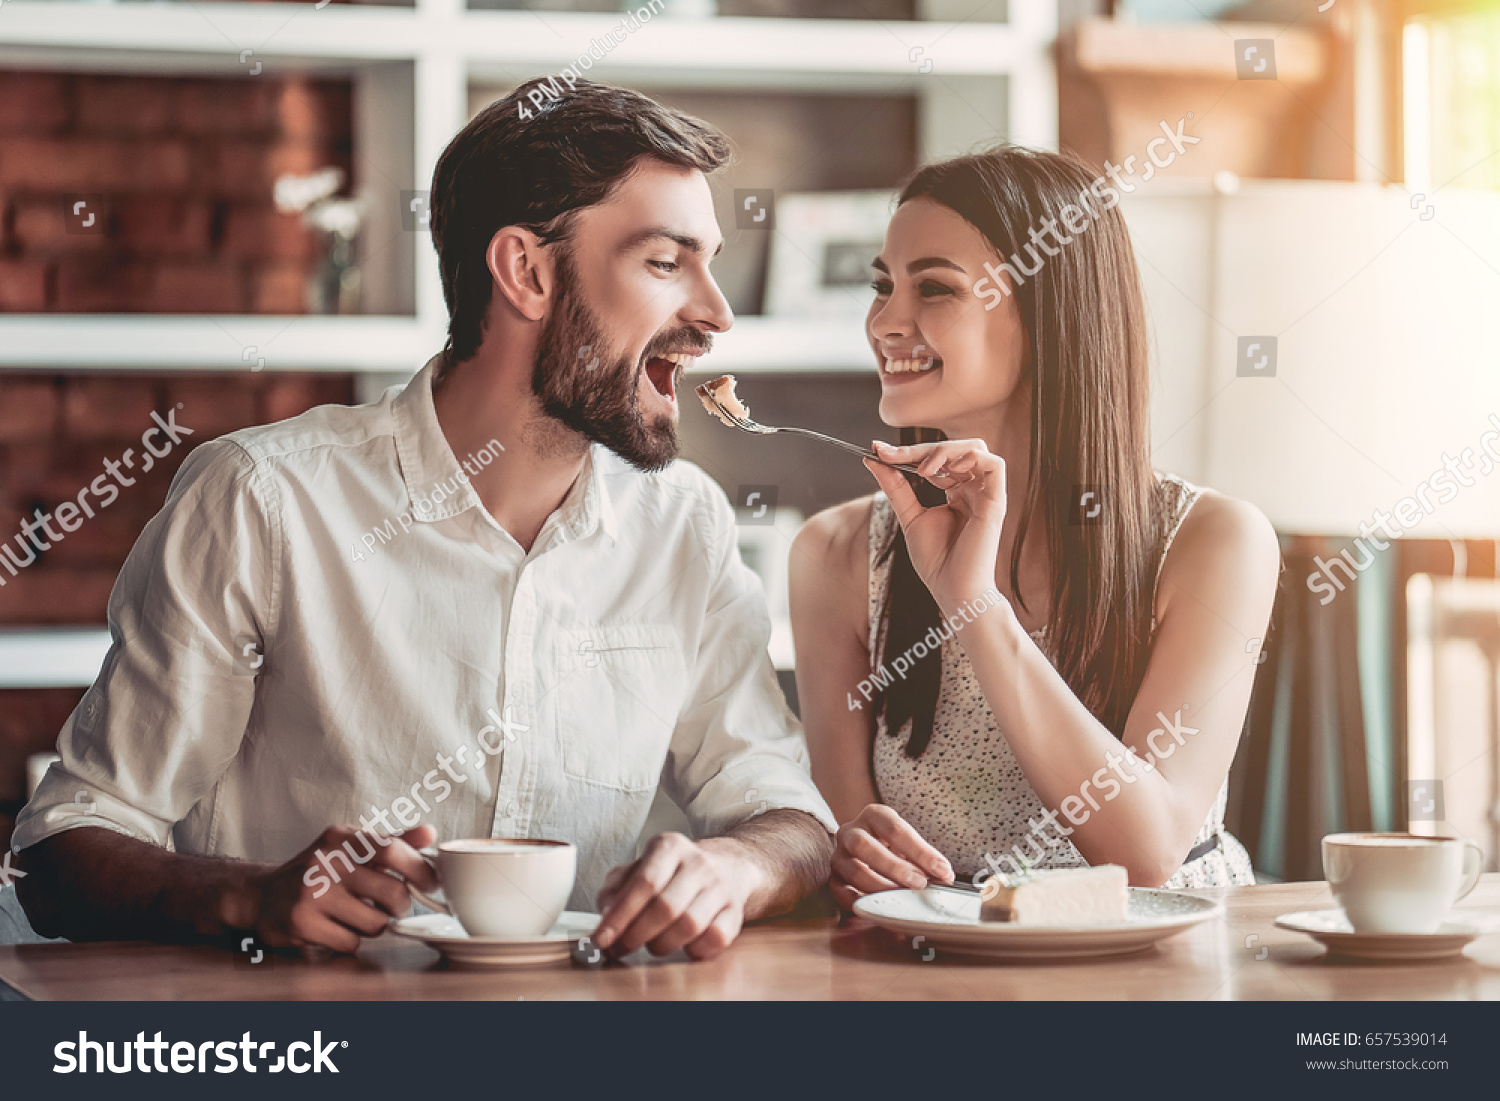 Beautiful couple in love is sitting in cafe, drinking coffee and eating cheesecake. Young woman is feeding her man. Looking softly on each other. #657539014